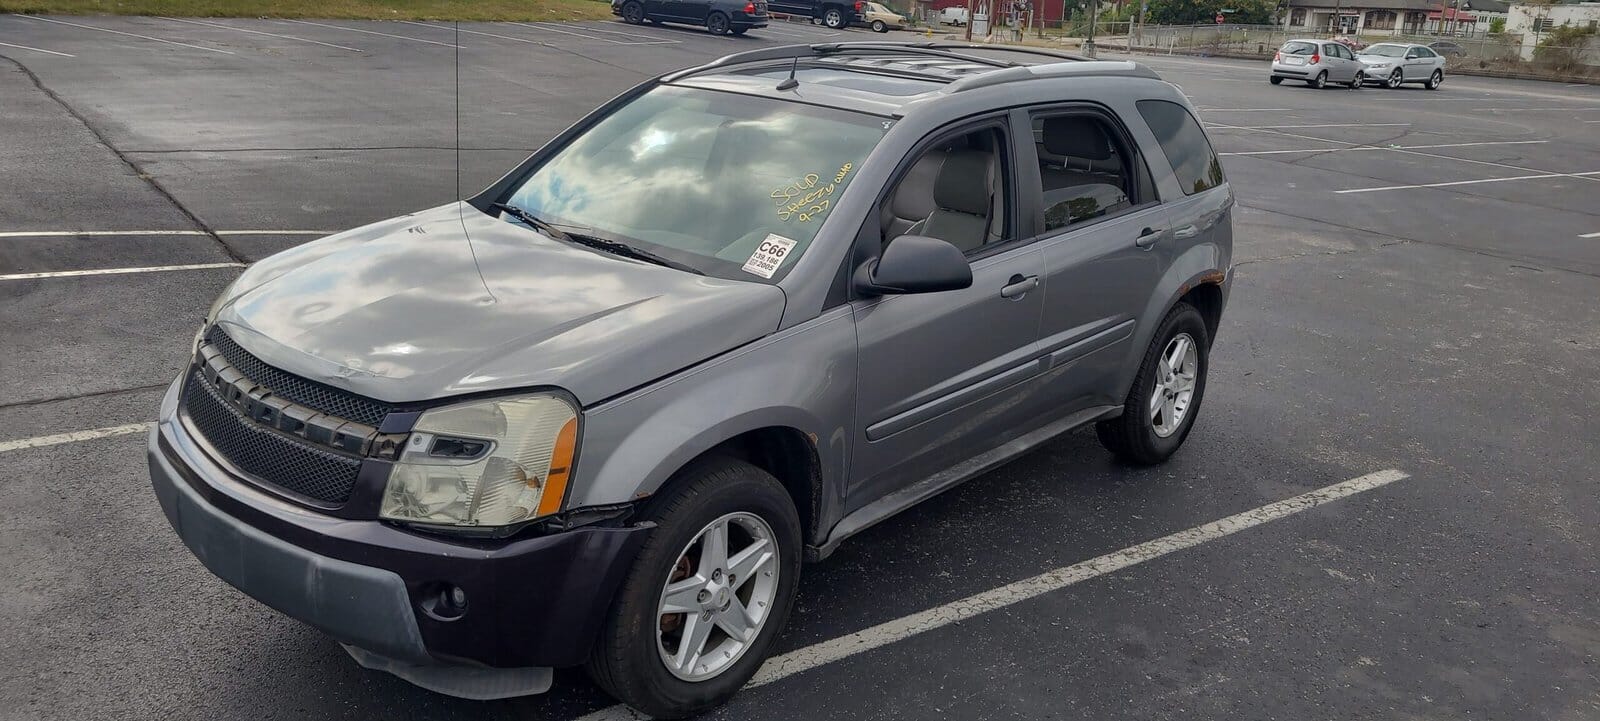 Read more about the article 2005 Chevrolet Equinox